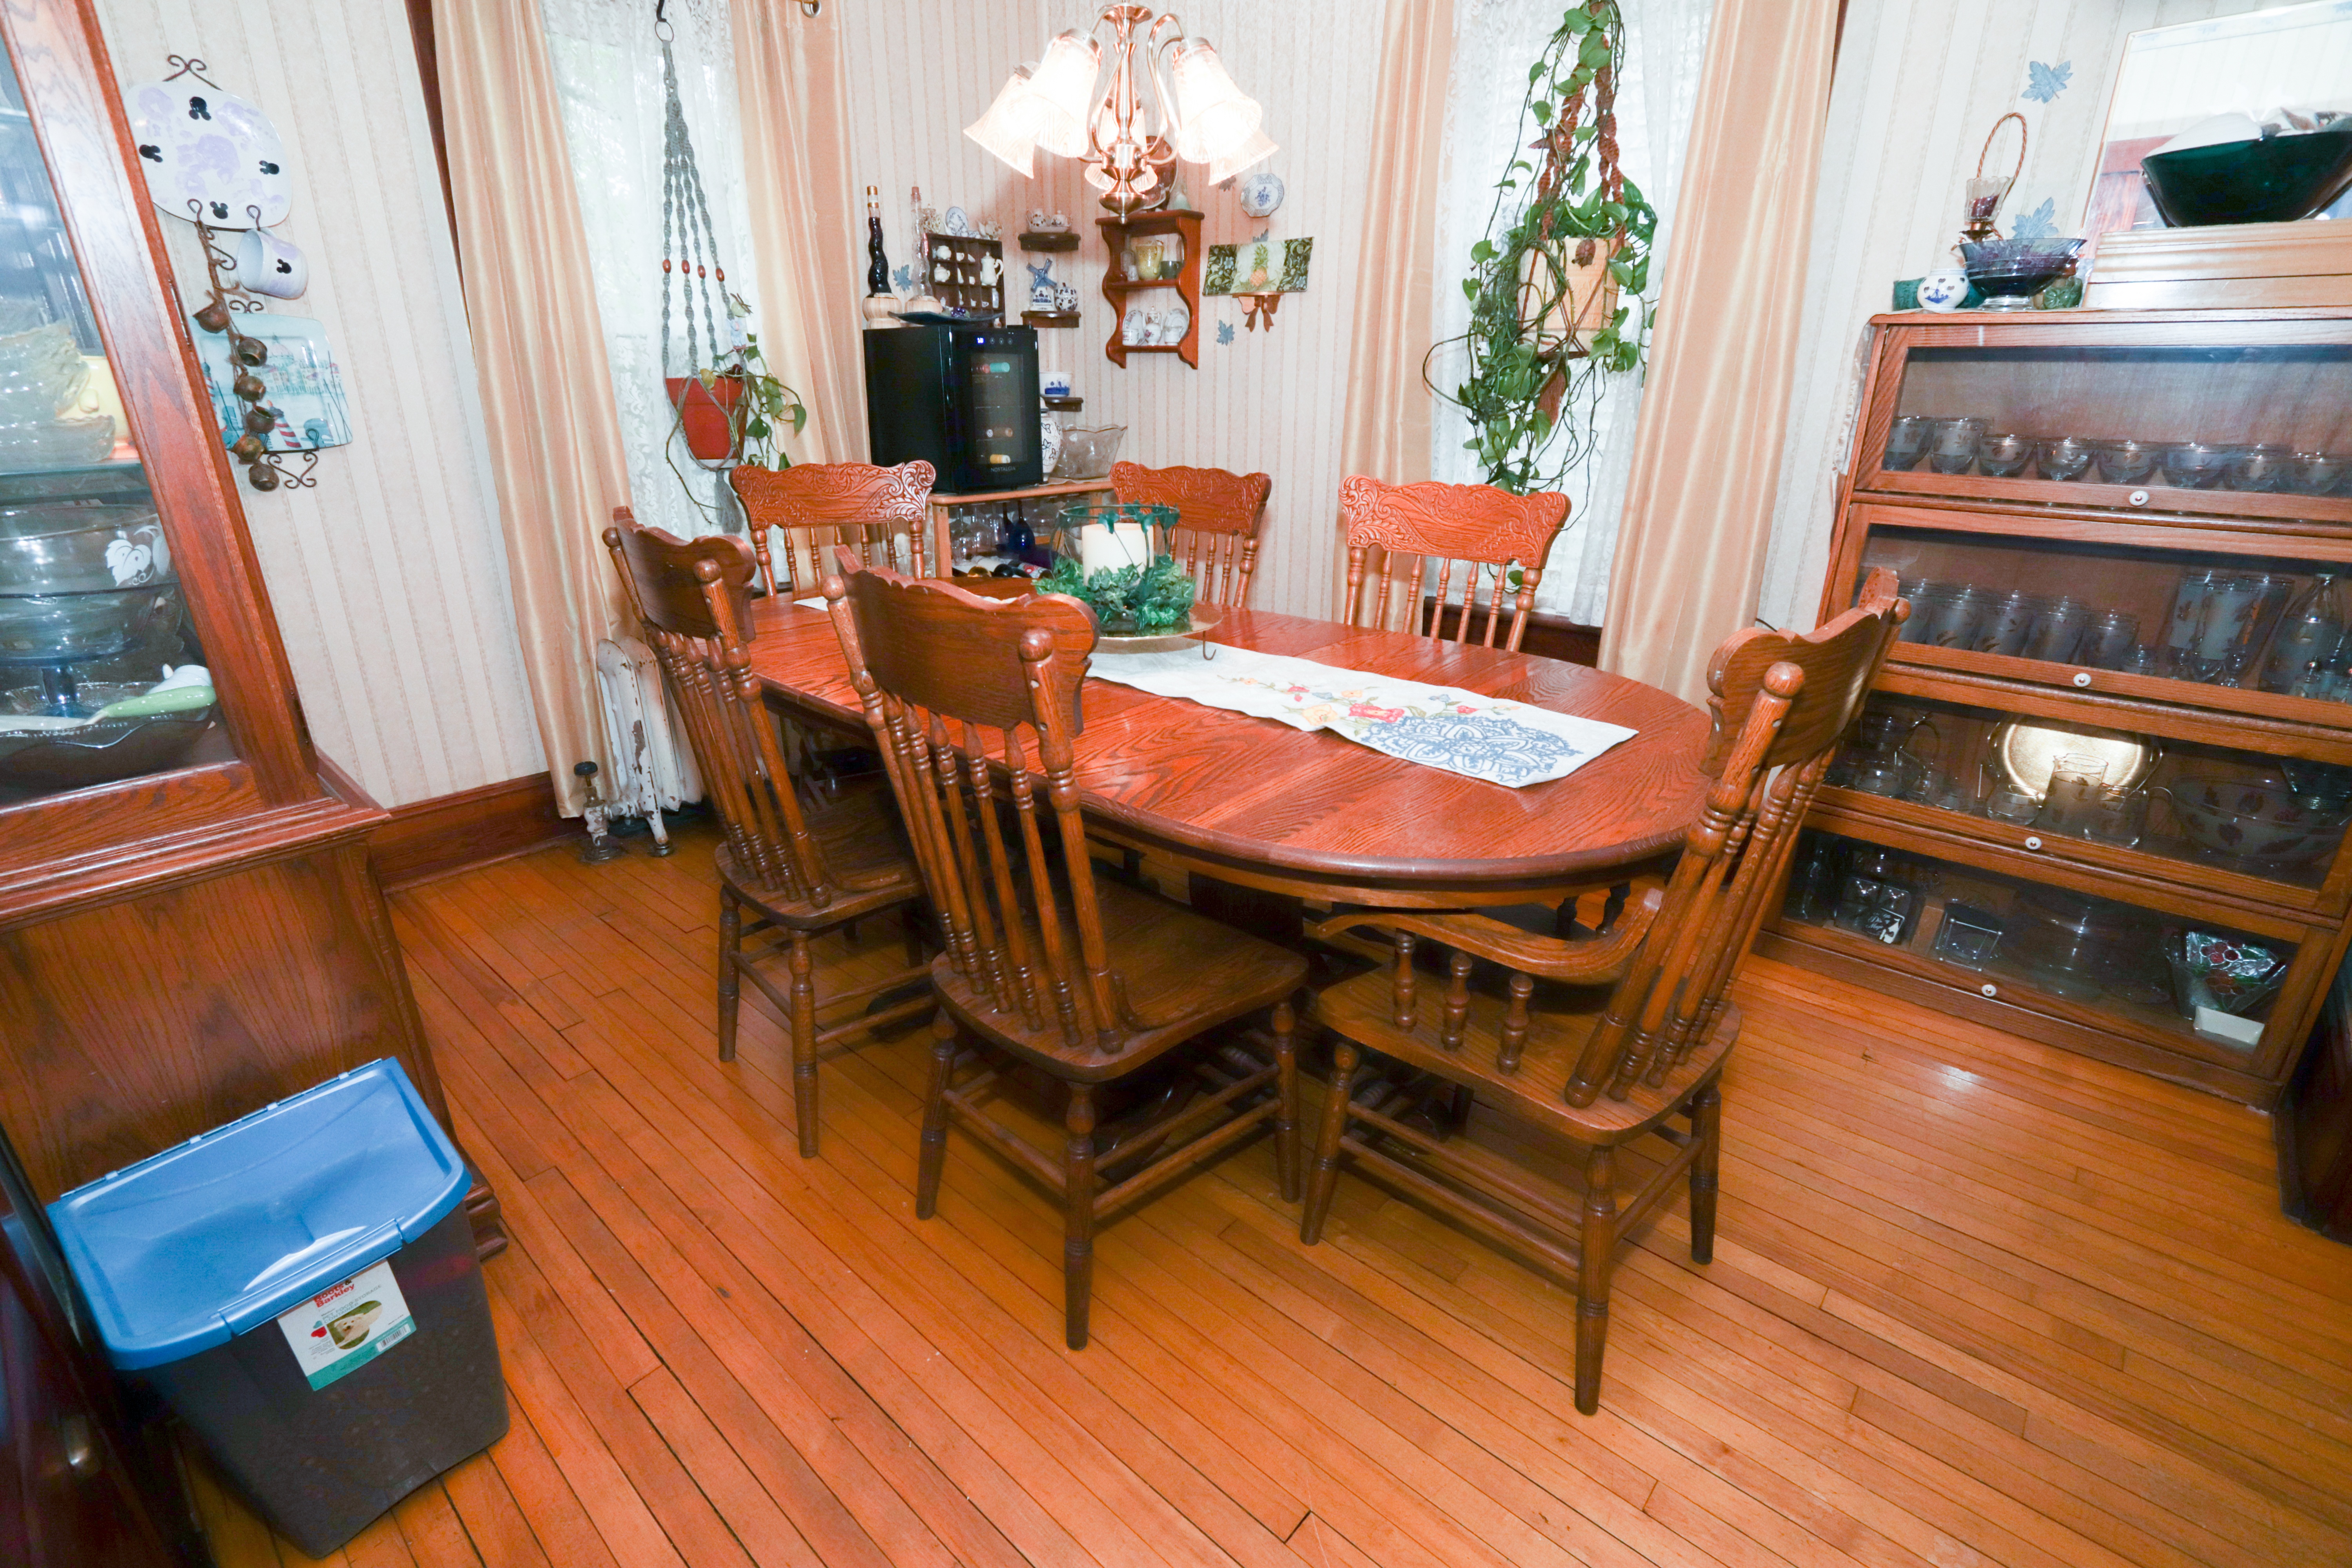 South Nashua House for Sale 34.5 Russell Ave Nashua NH 03060 dining room2